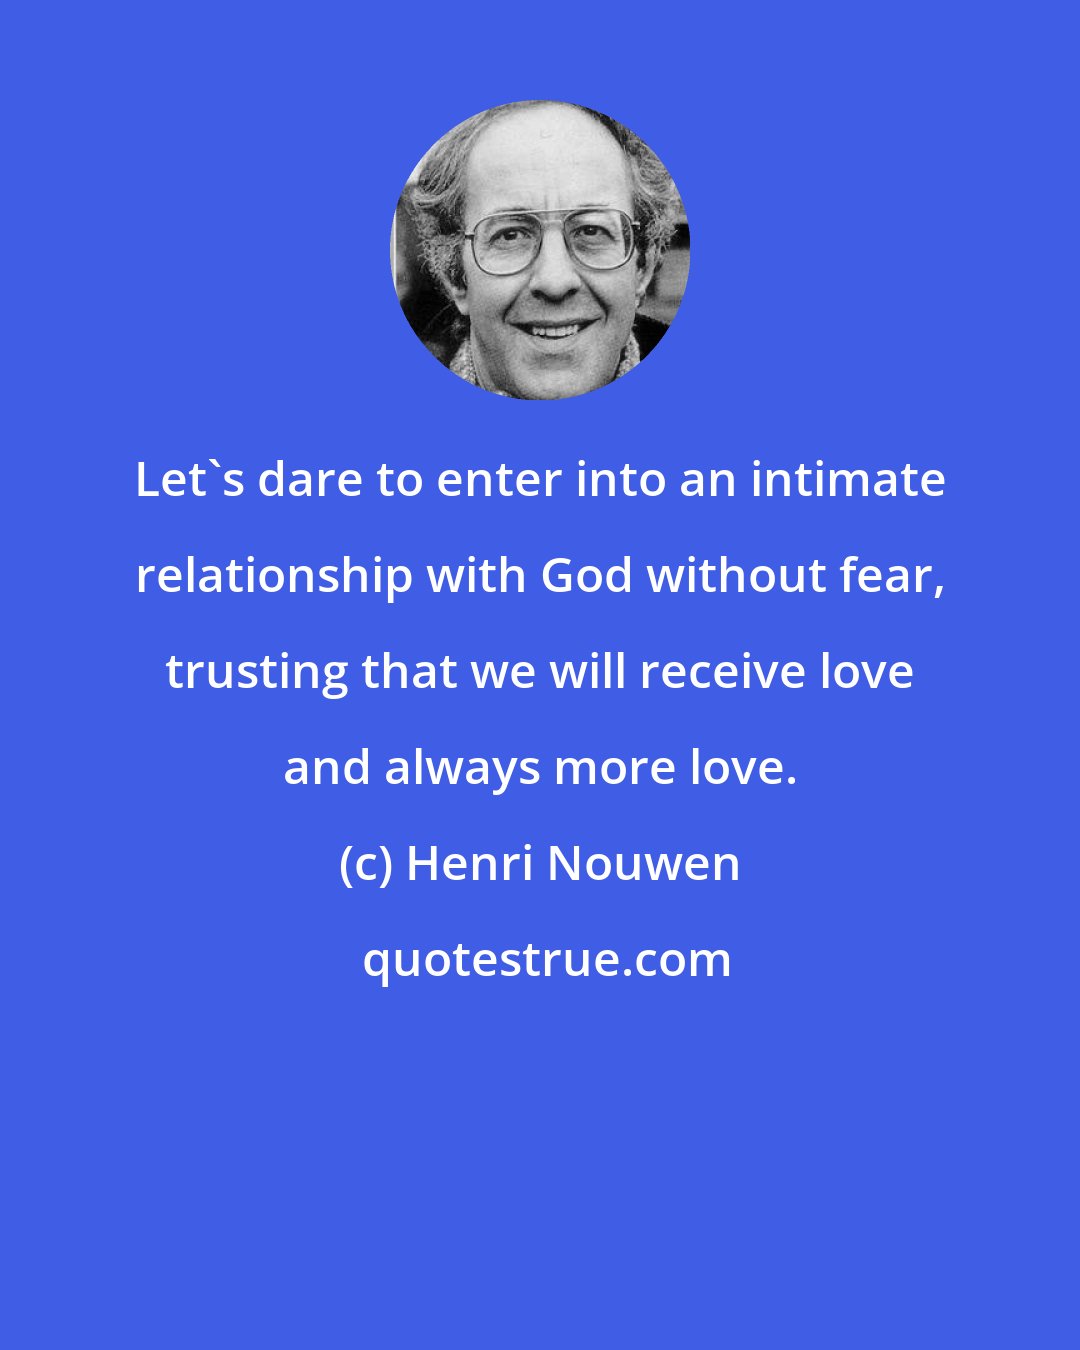 Henri Nouwen: Let's dare to enter into an intimate relationship with God without fear, trusting that we will receive love and always more love.